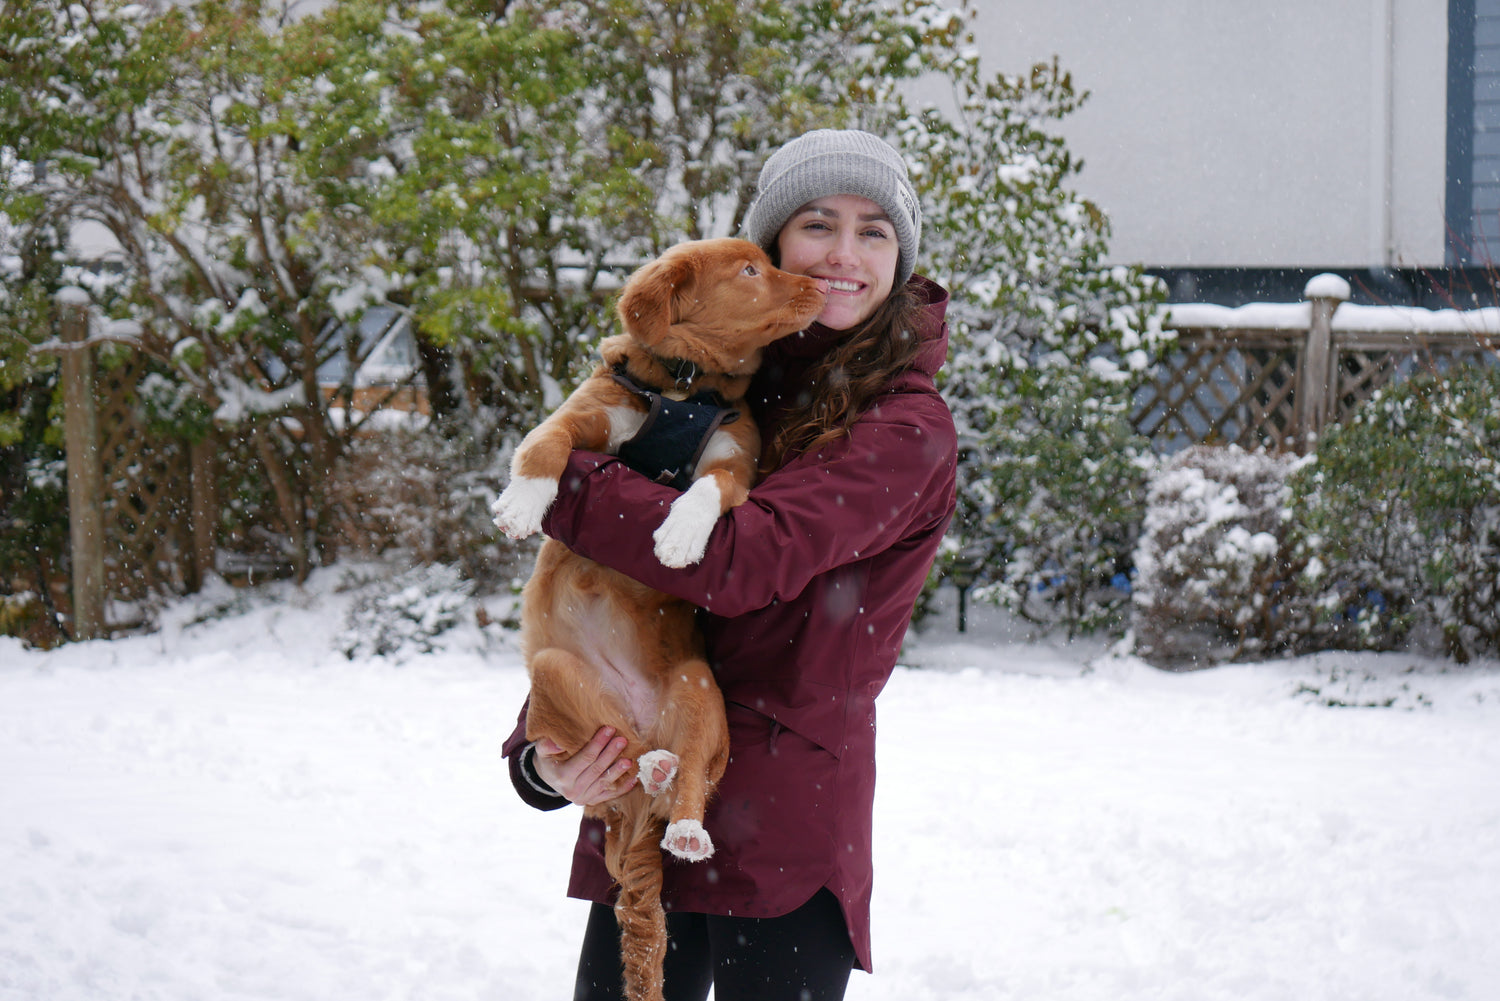 Tundra Designs owner and name inspiration, Colleen Grehan and her duck toller Tundra